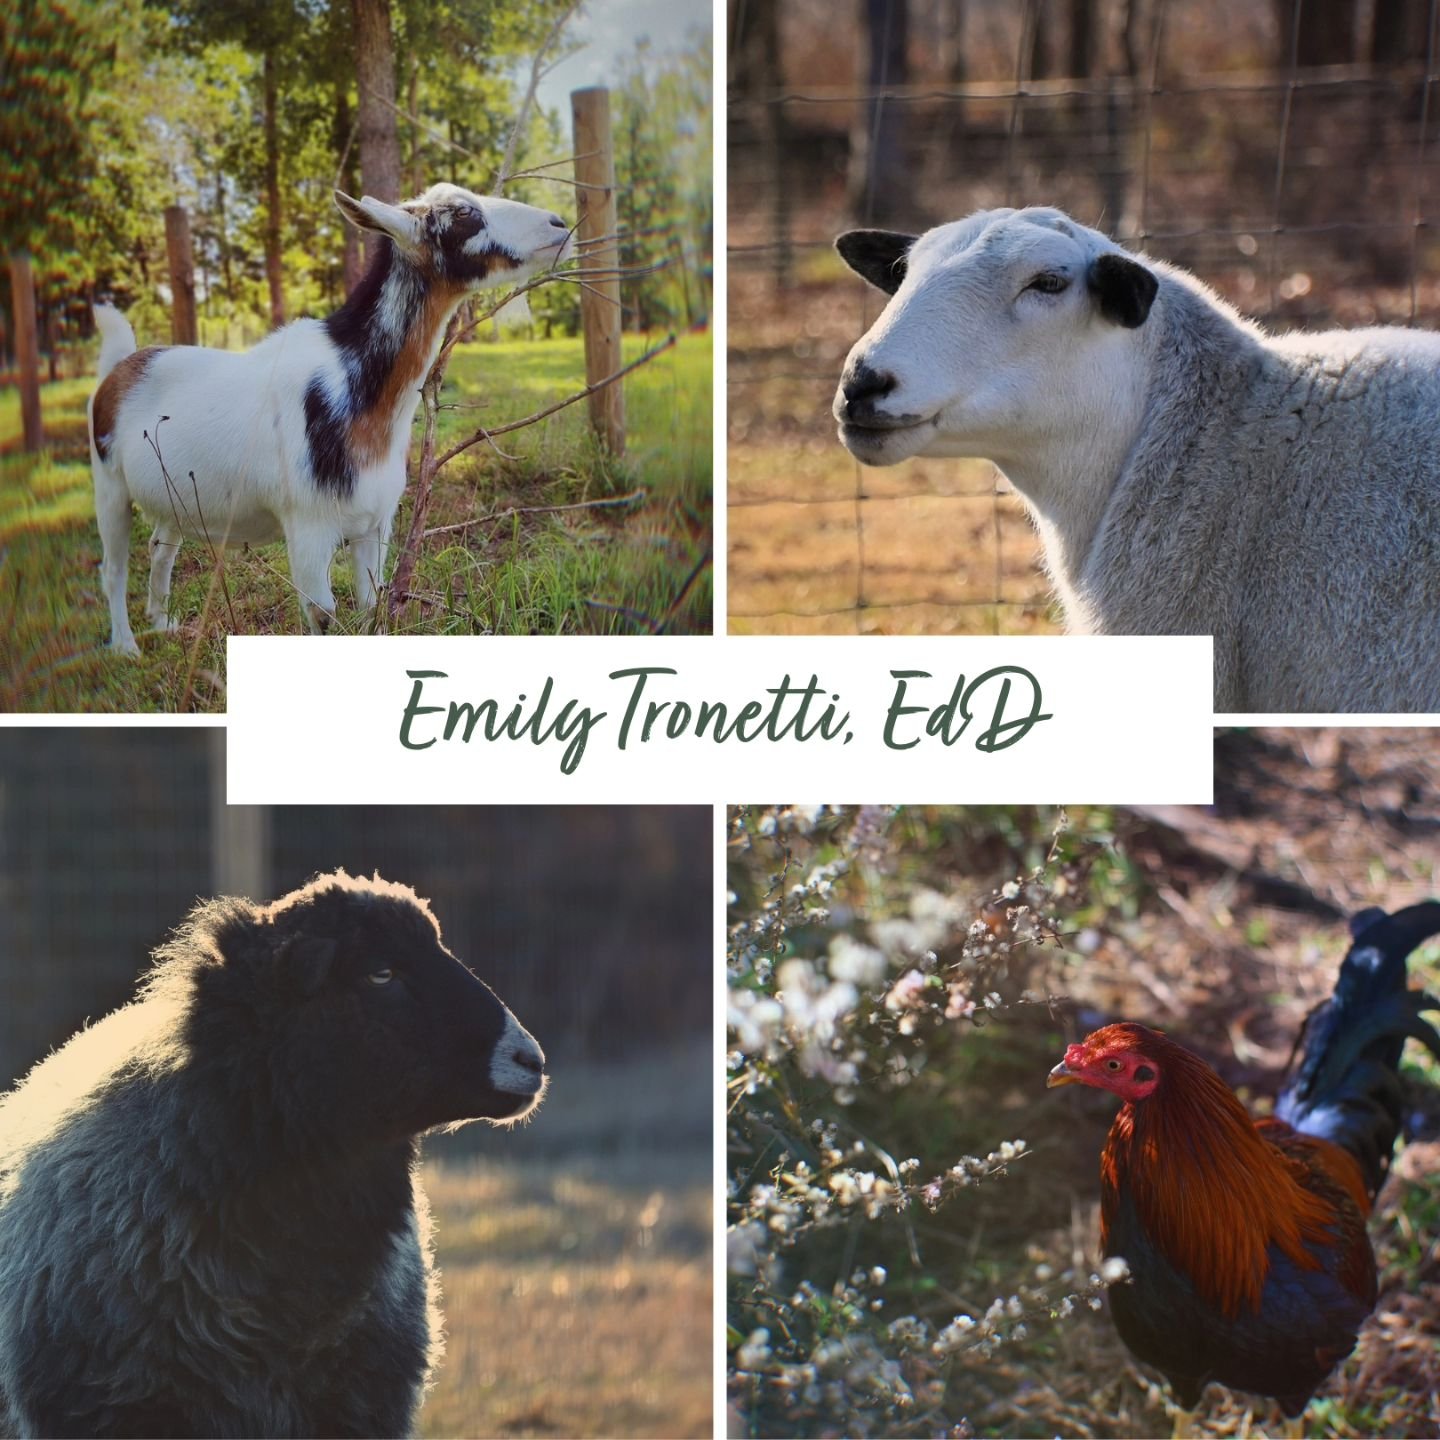 My dissertation is published, and my diploma is on its way... So, I think it's safe to officially say that I have my EdD!

These are photos of some of my most important contributors to my dissertation work ❤️. There are also many other beings, both h